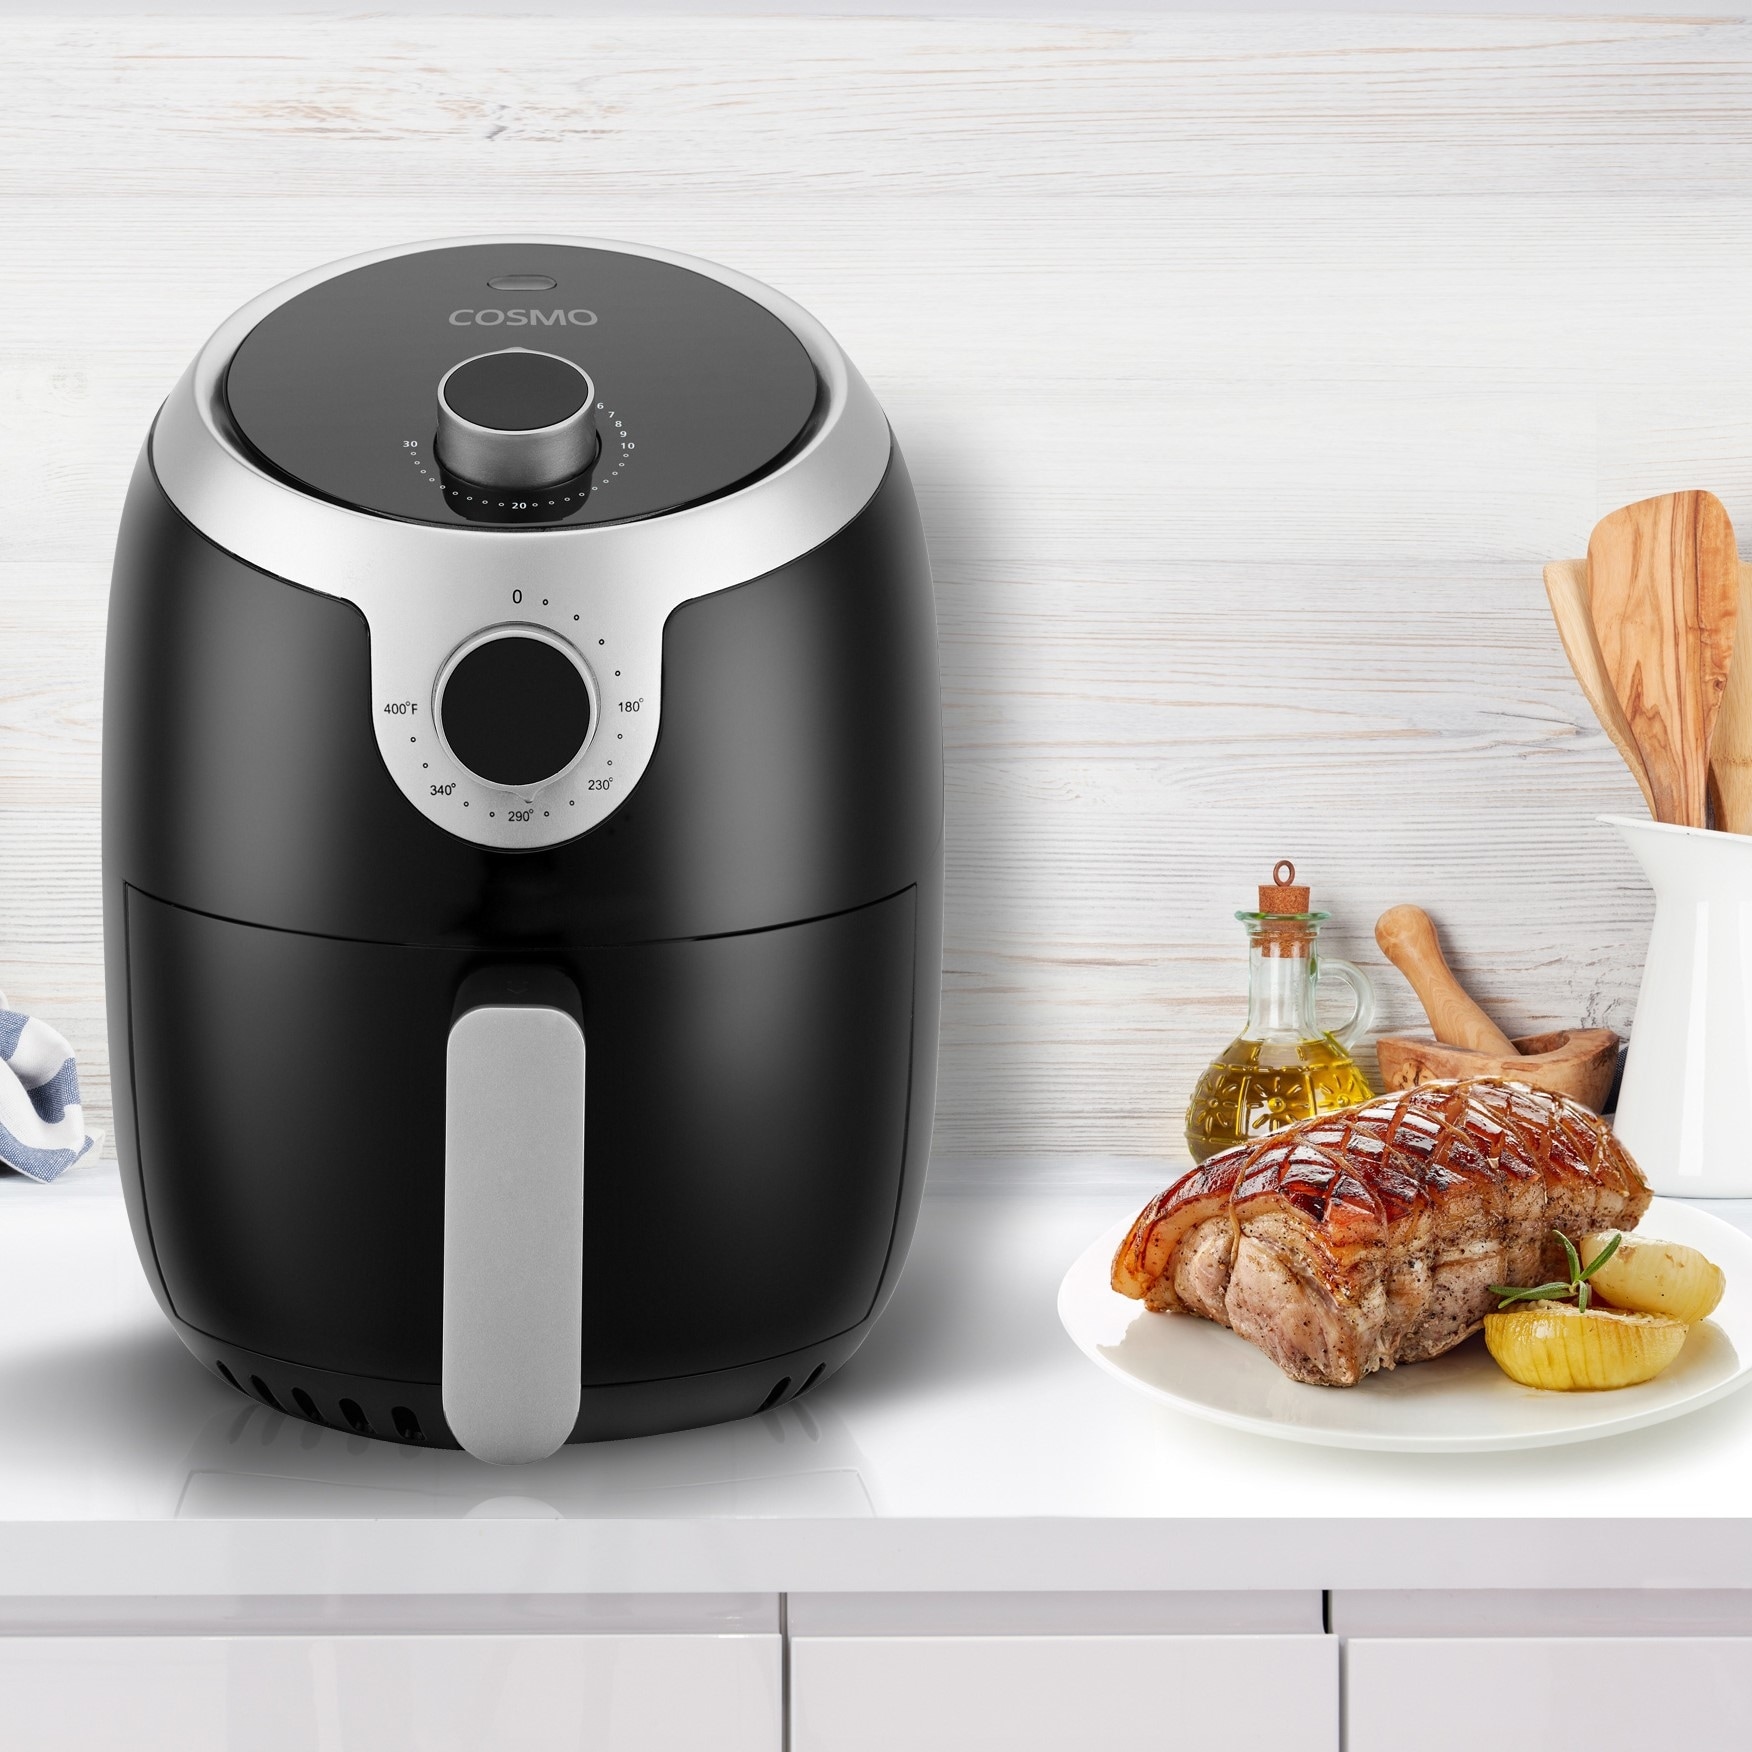 https://ak1.ostkcdn.com/images/products/is/images/direct/d332183a4cfdaa90709f85c8a9a7affc4e1841b8/2.3-Quart-Air-Fryer-with-Temperature-Control%2C-Timer-%26-Auto-Shut-Off.jpg